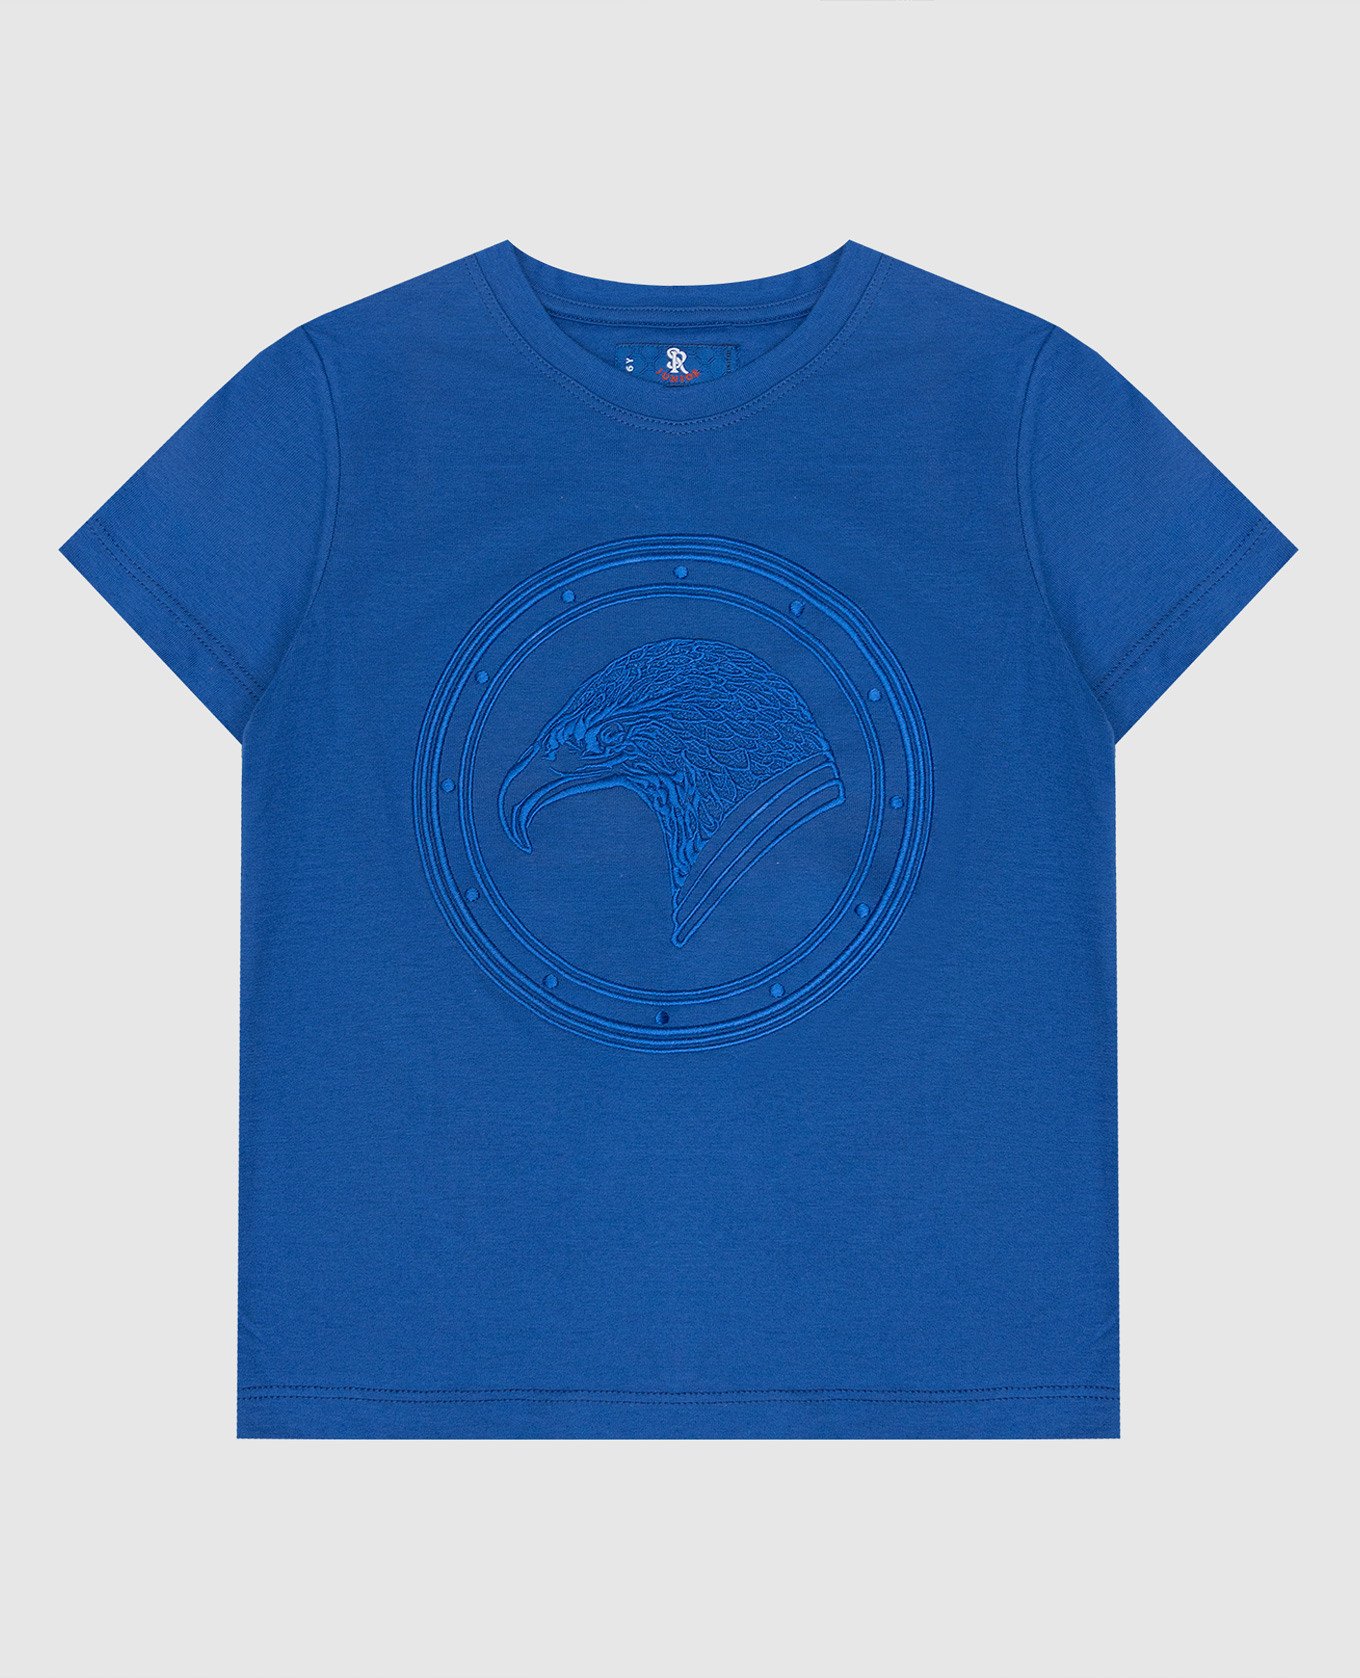 Children's blue t-shirt with emblem embroidery